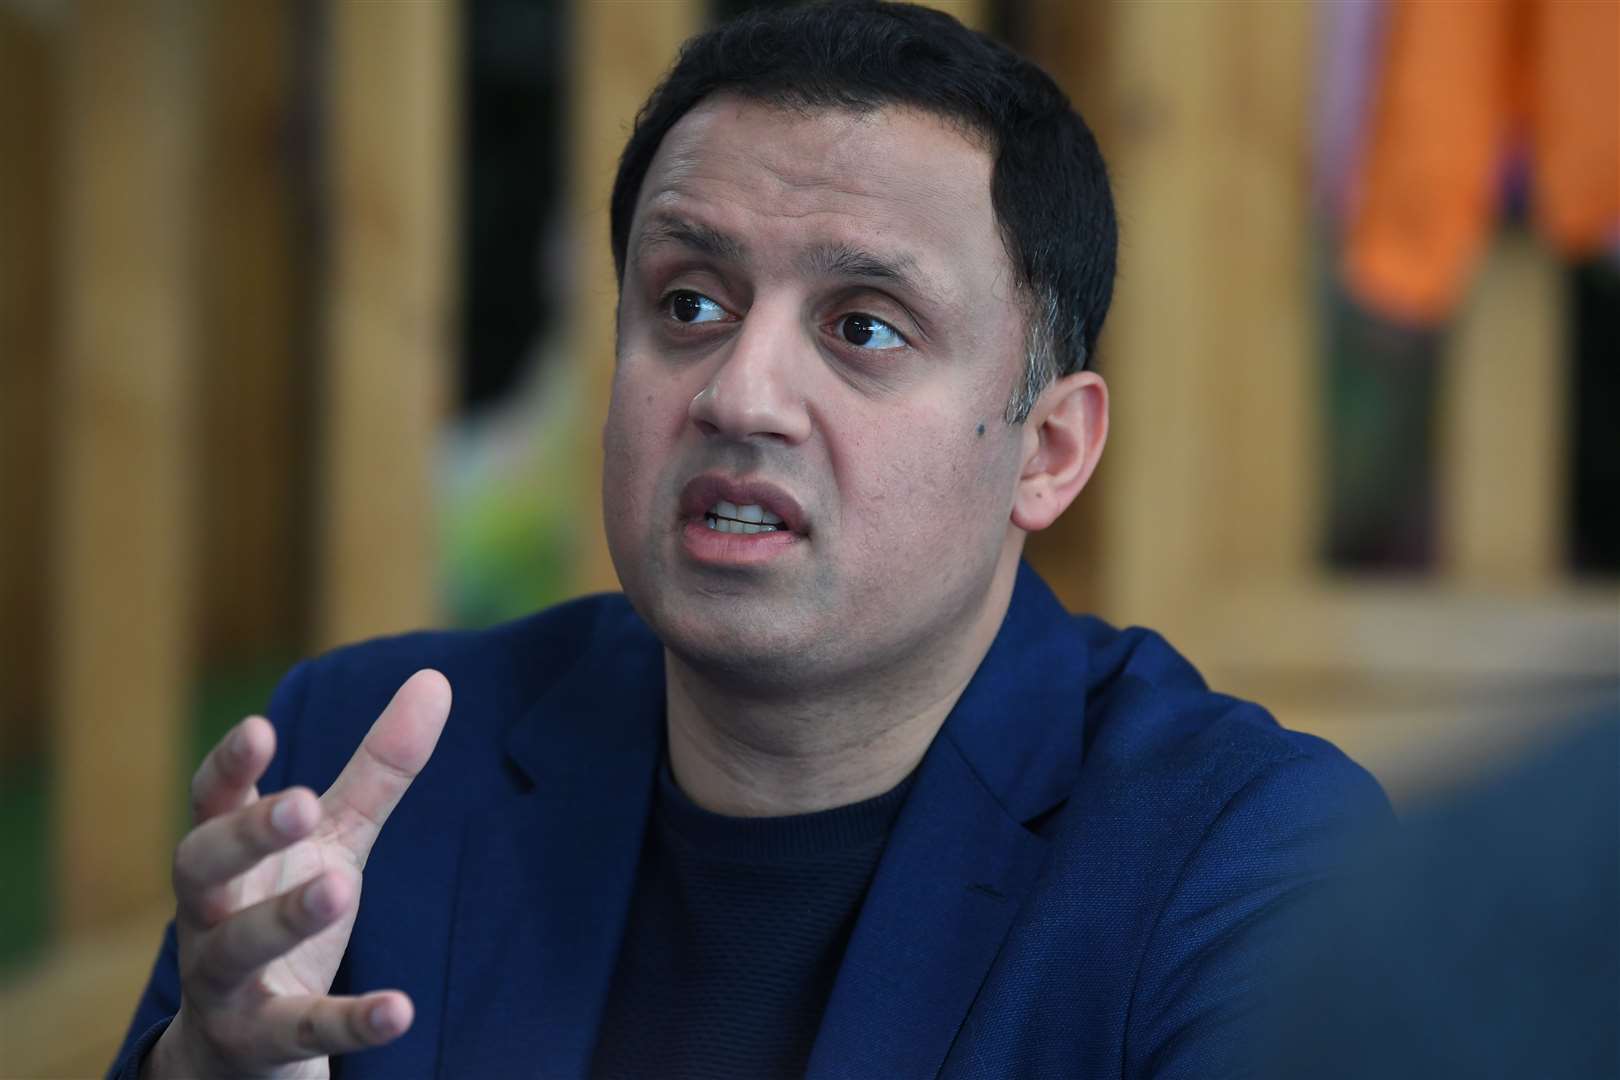 Scottish Labour leader Anas Sarwar is due to unveil his party’s manifesto for north of the border (Andy Buchanan/PA)